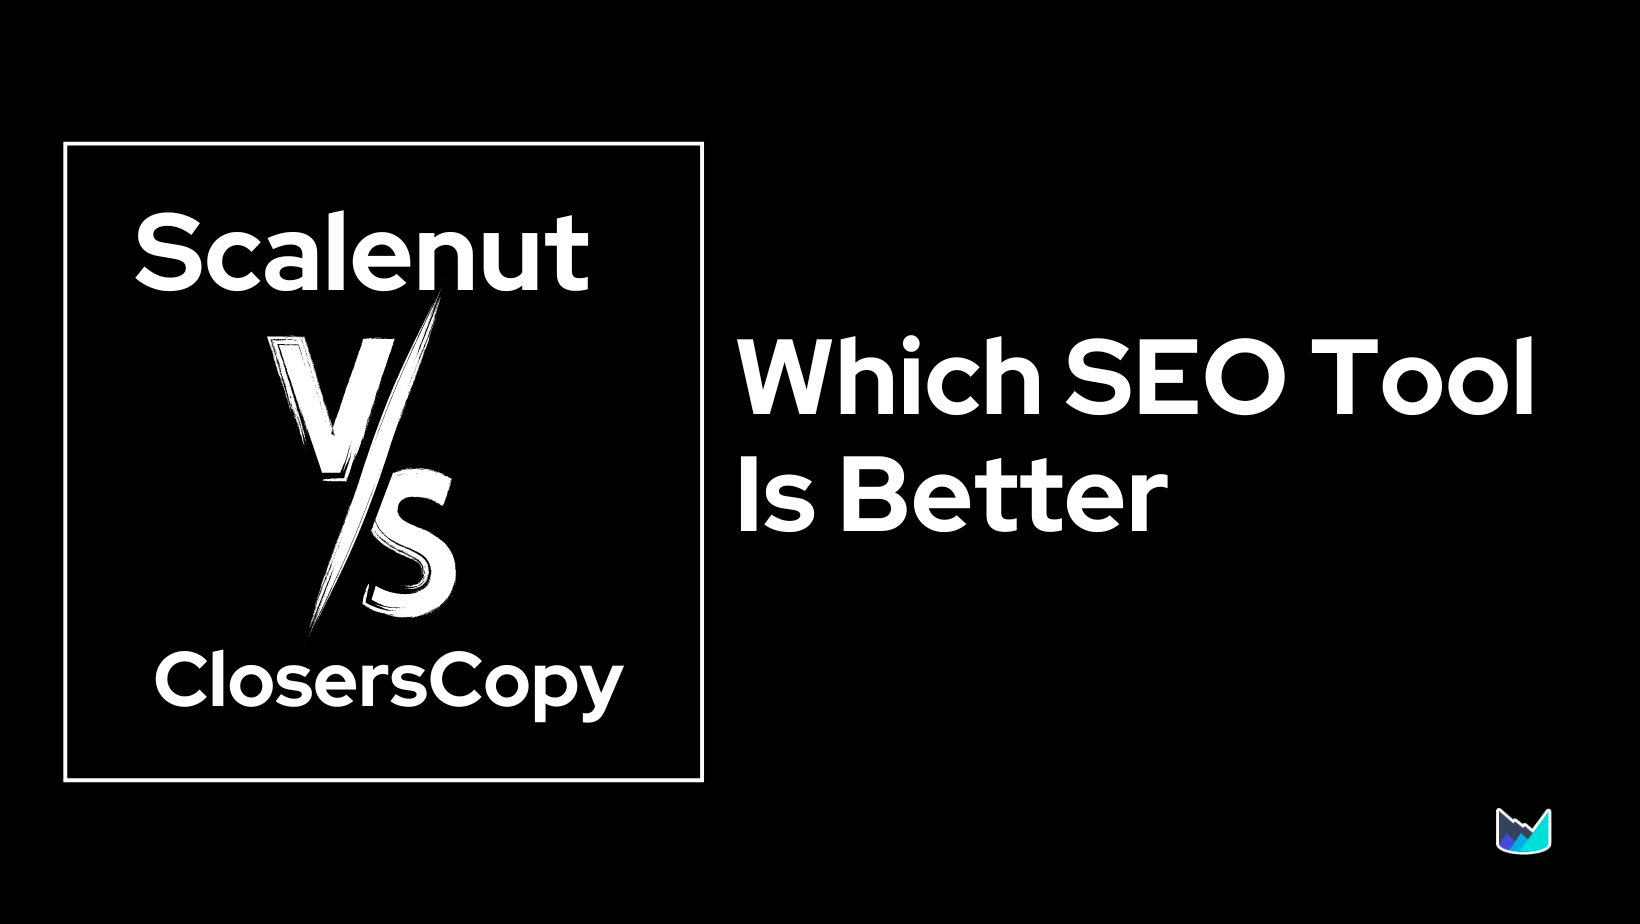 Scalenut vs ClosersCopy: Which SEO Tool Is Better?